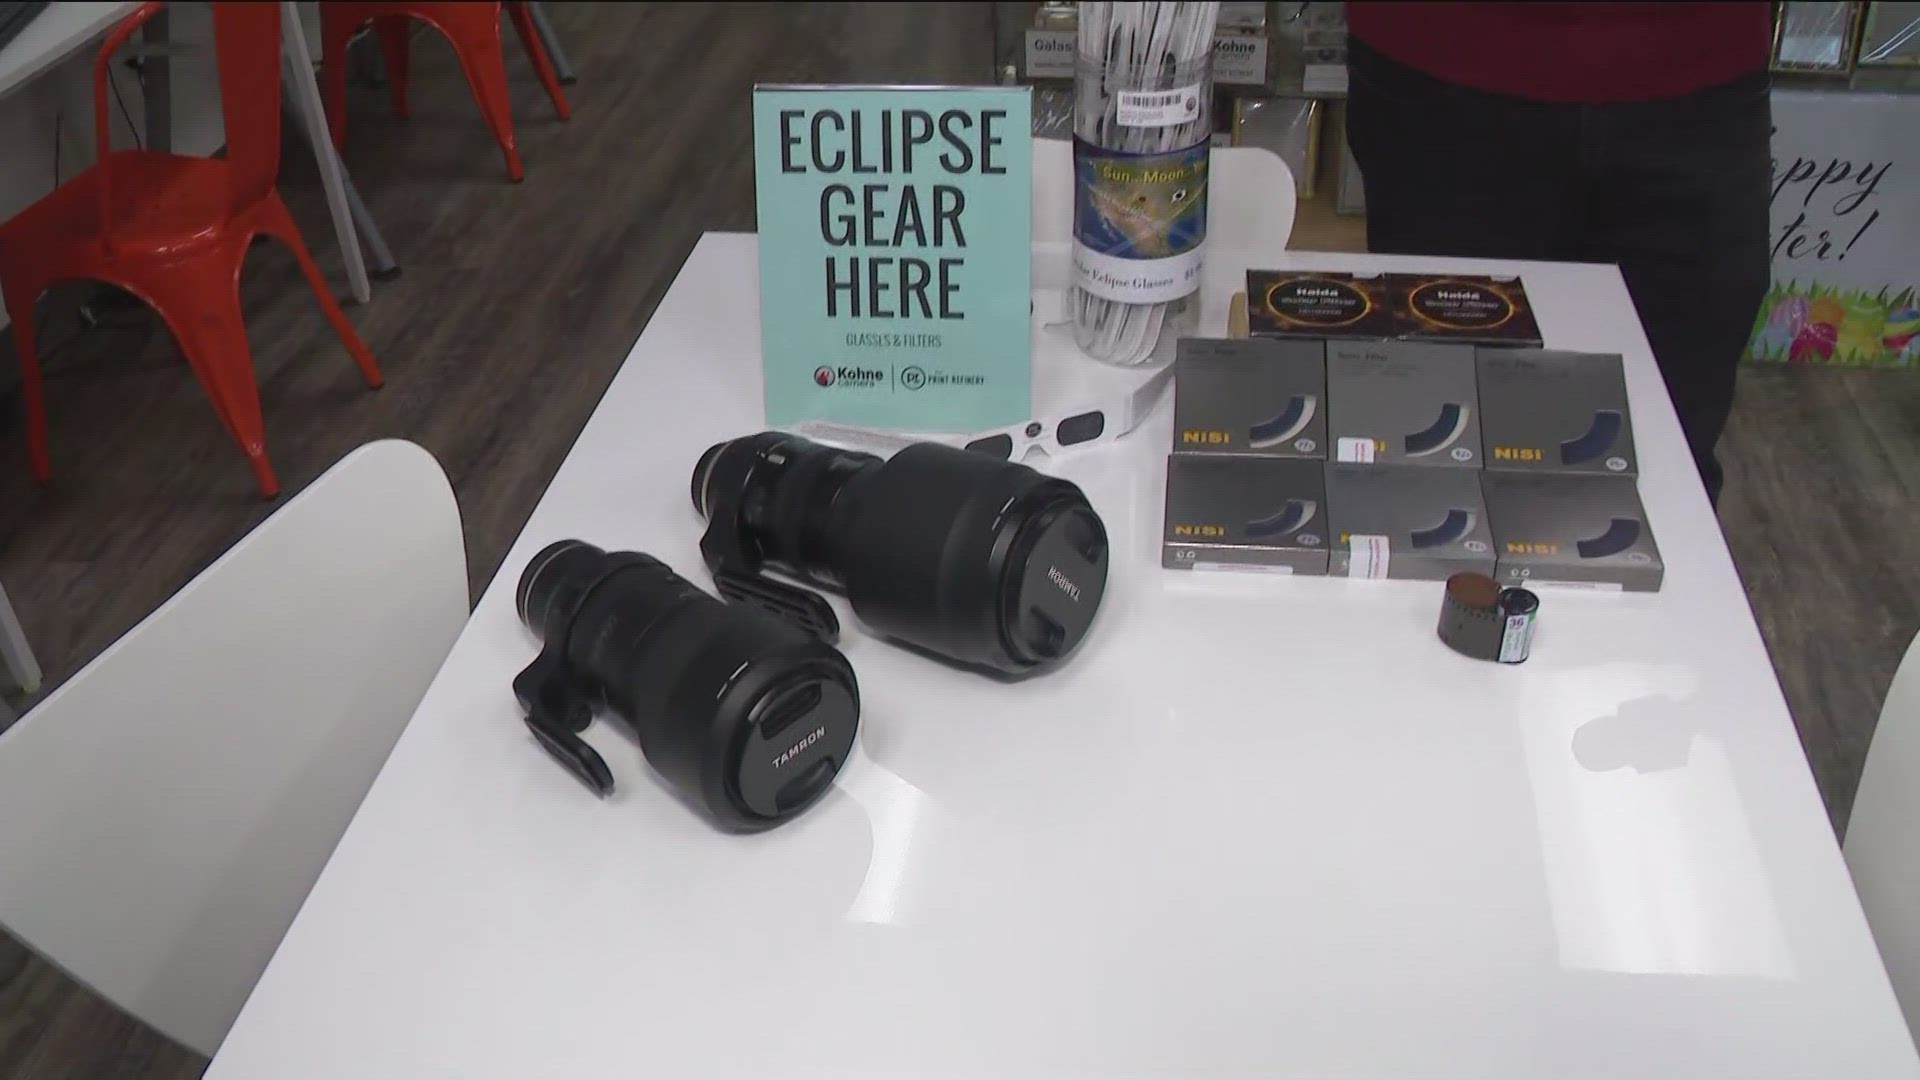 Gear for Safely Viewing the Solar Eclipse